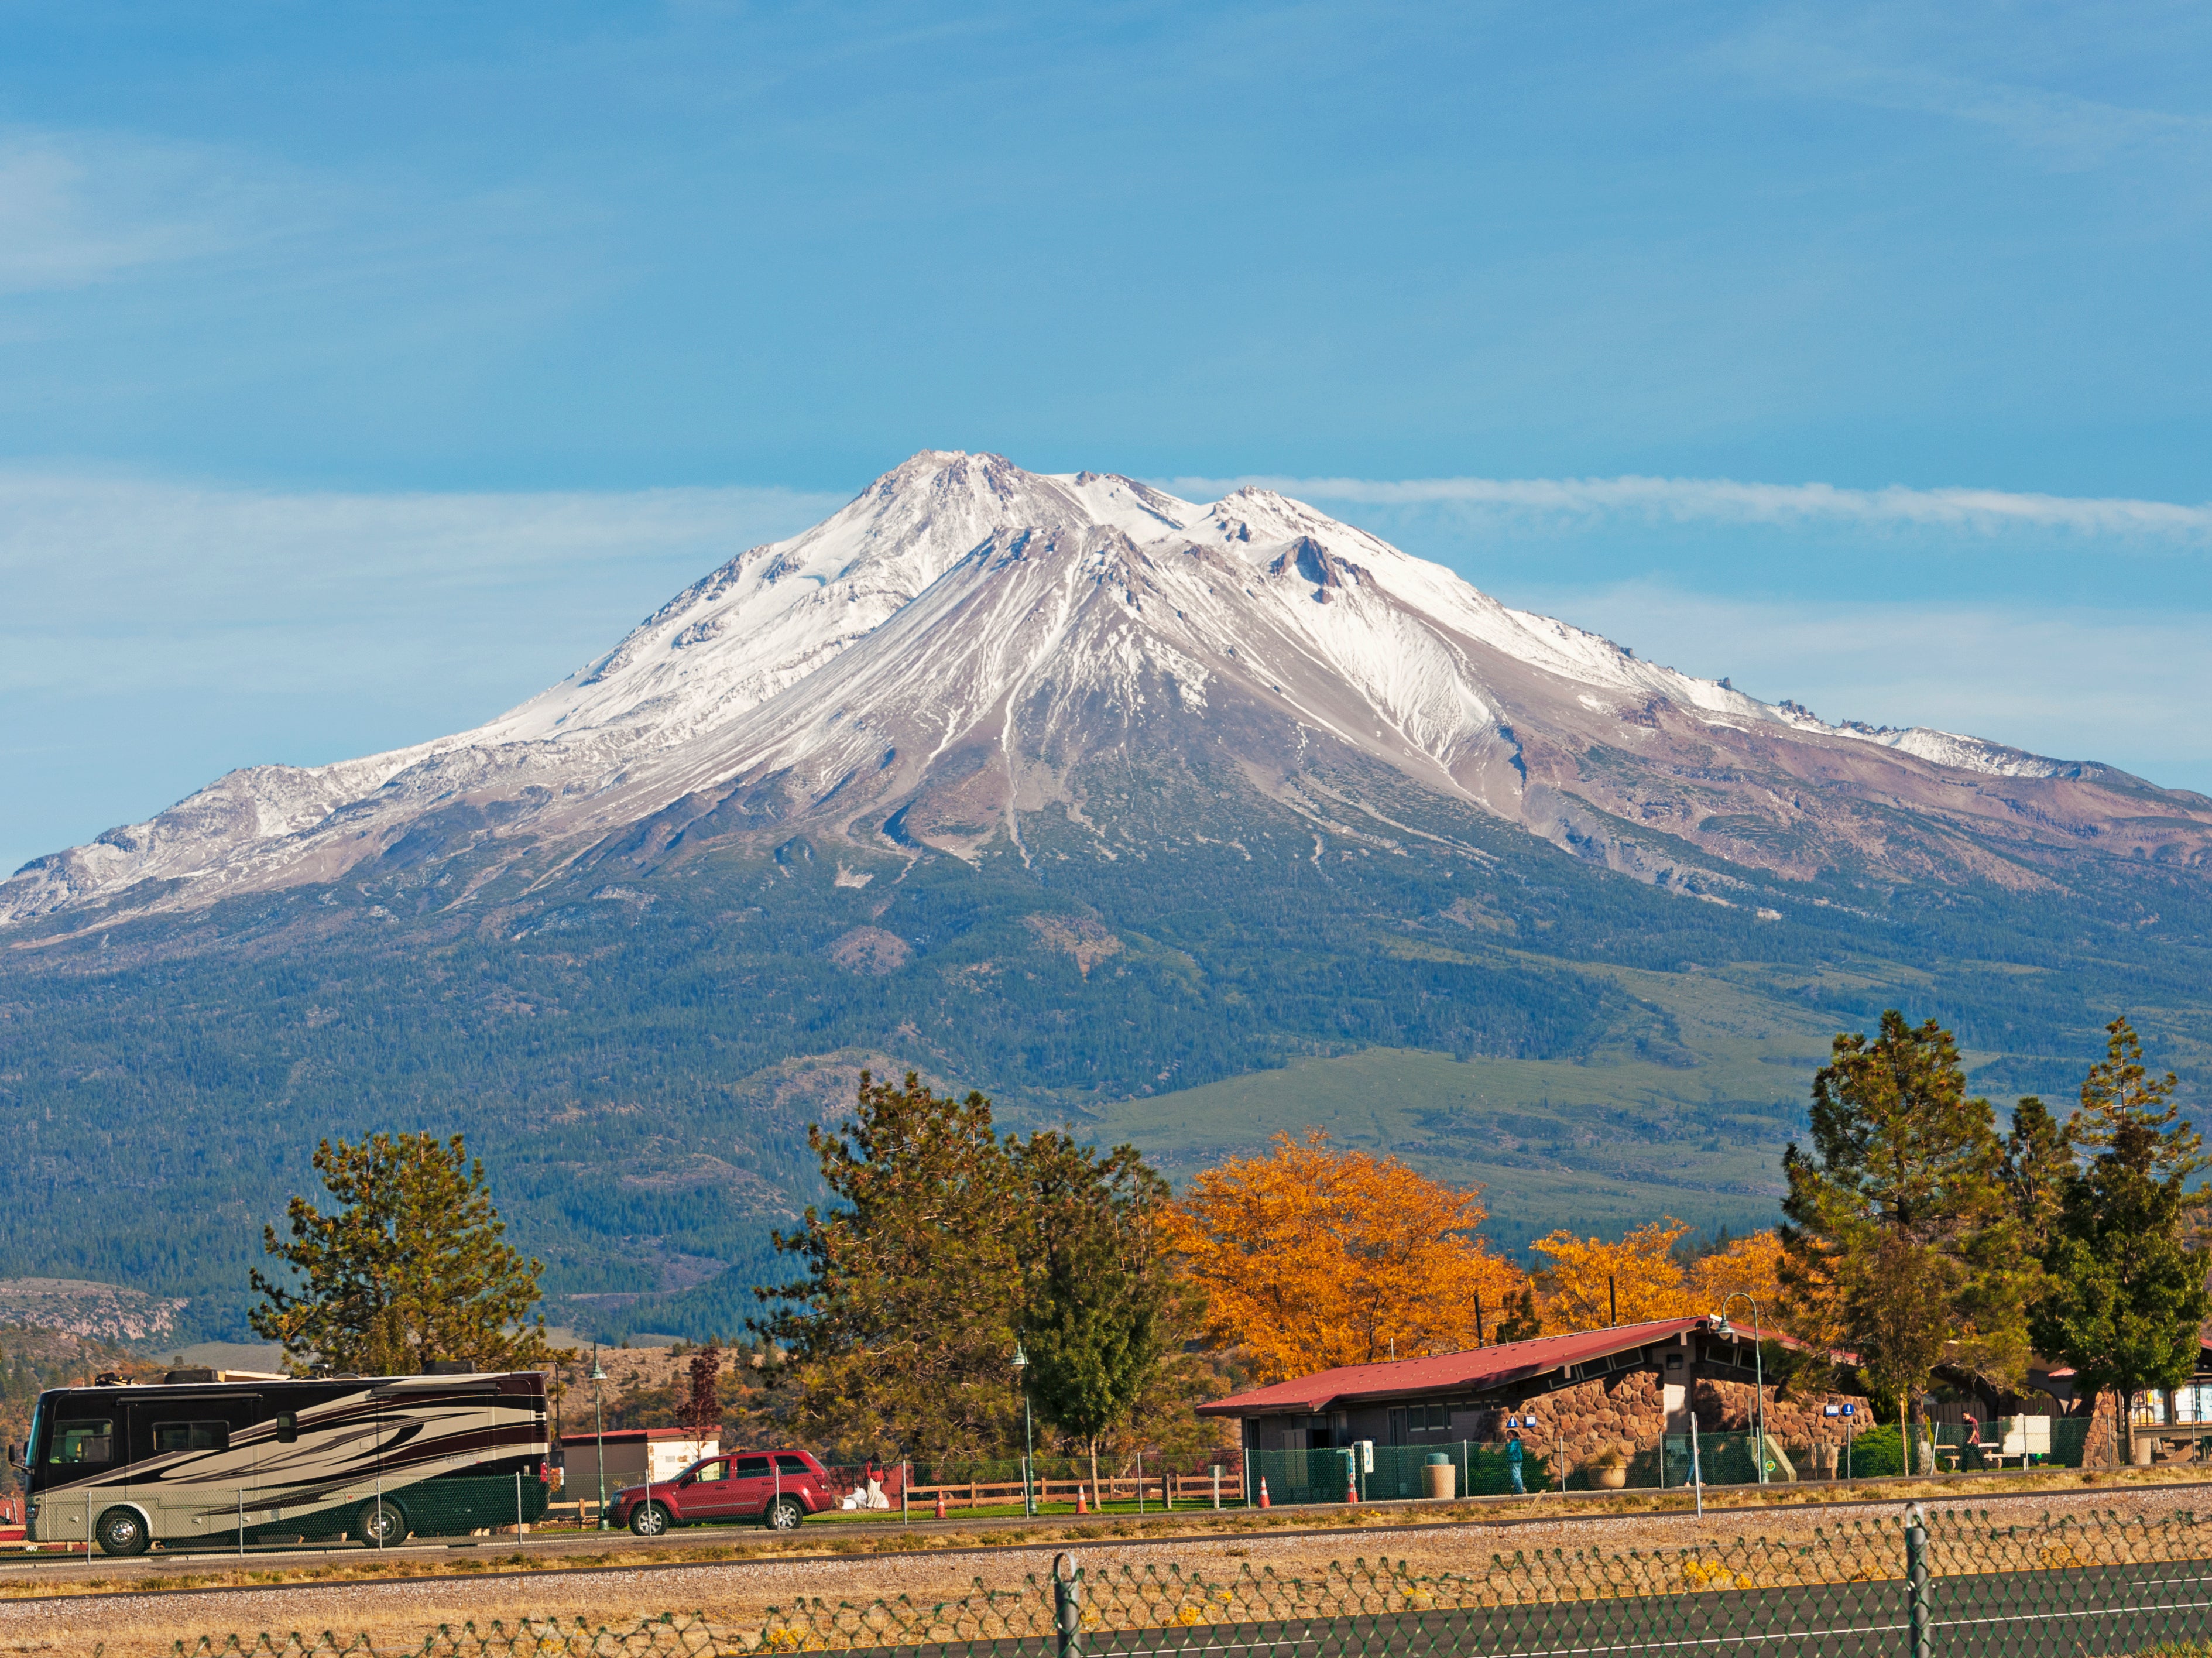 Mount Shasta as seen from California’s Highway 5